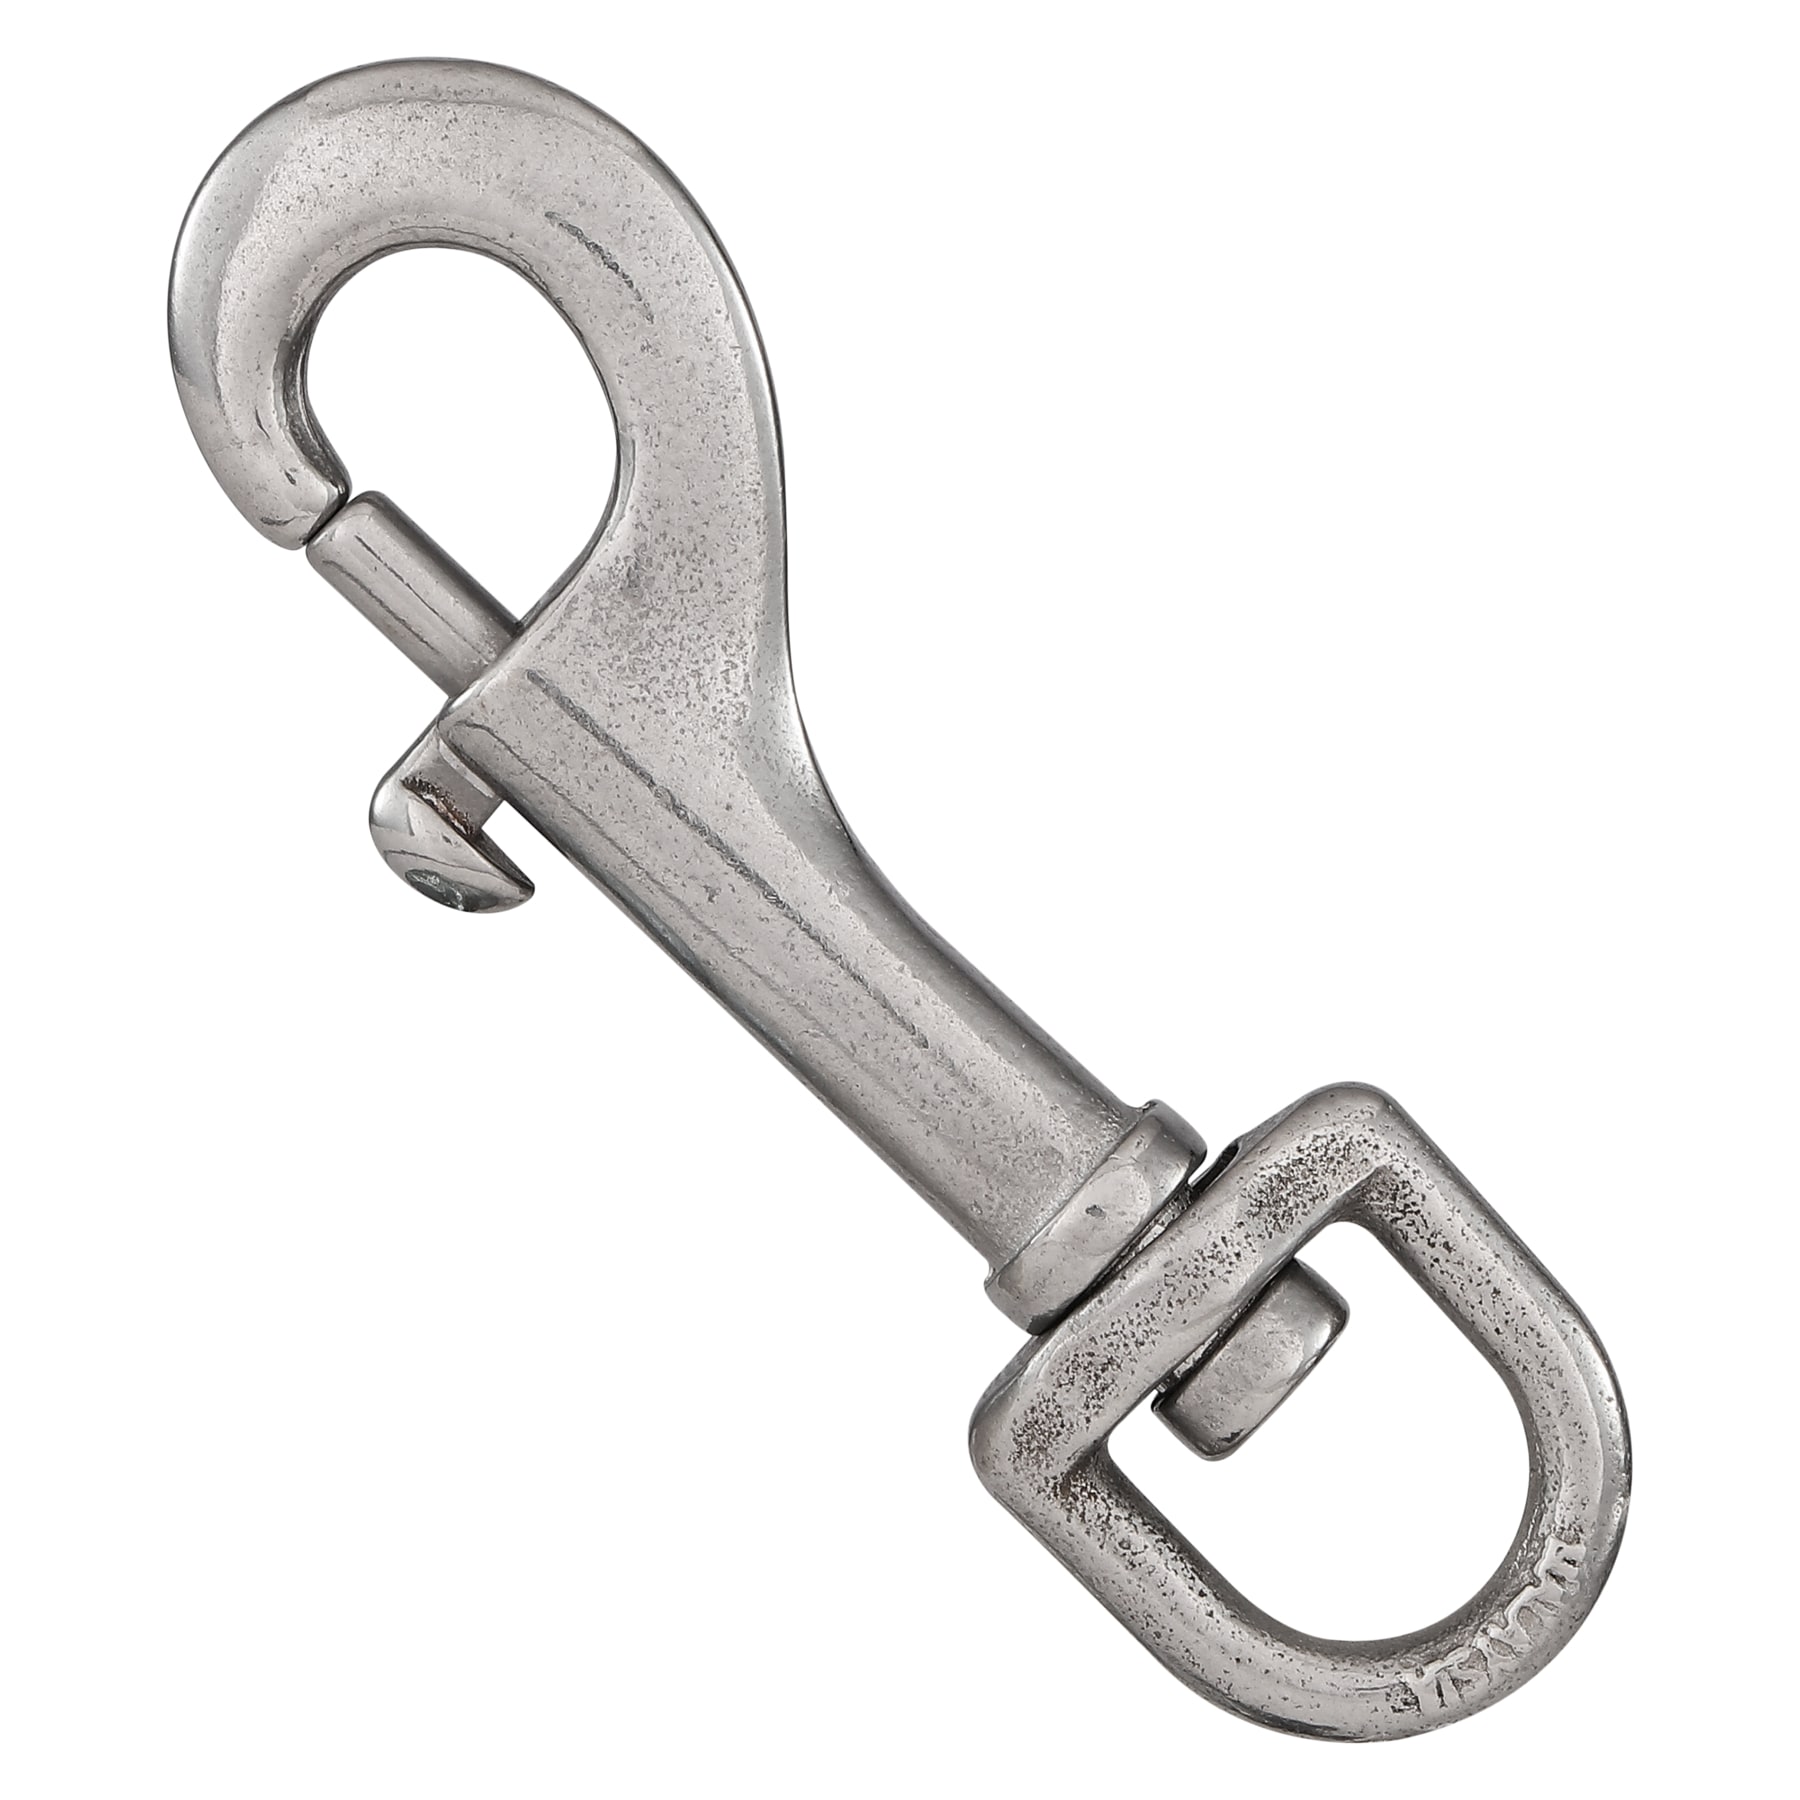 National Hardware N100-303- 1/2-in x 3-in Bolt Snap in Stainless